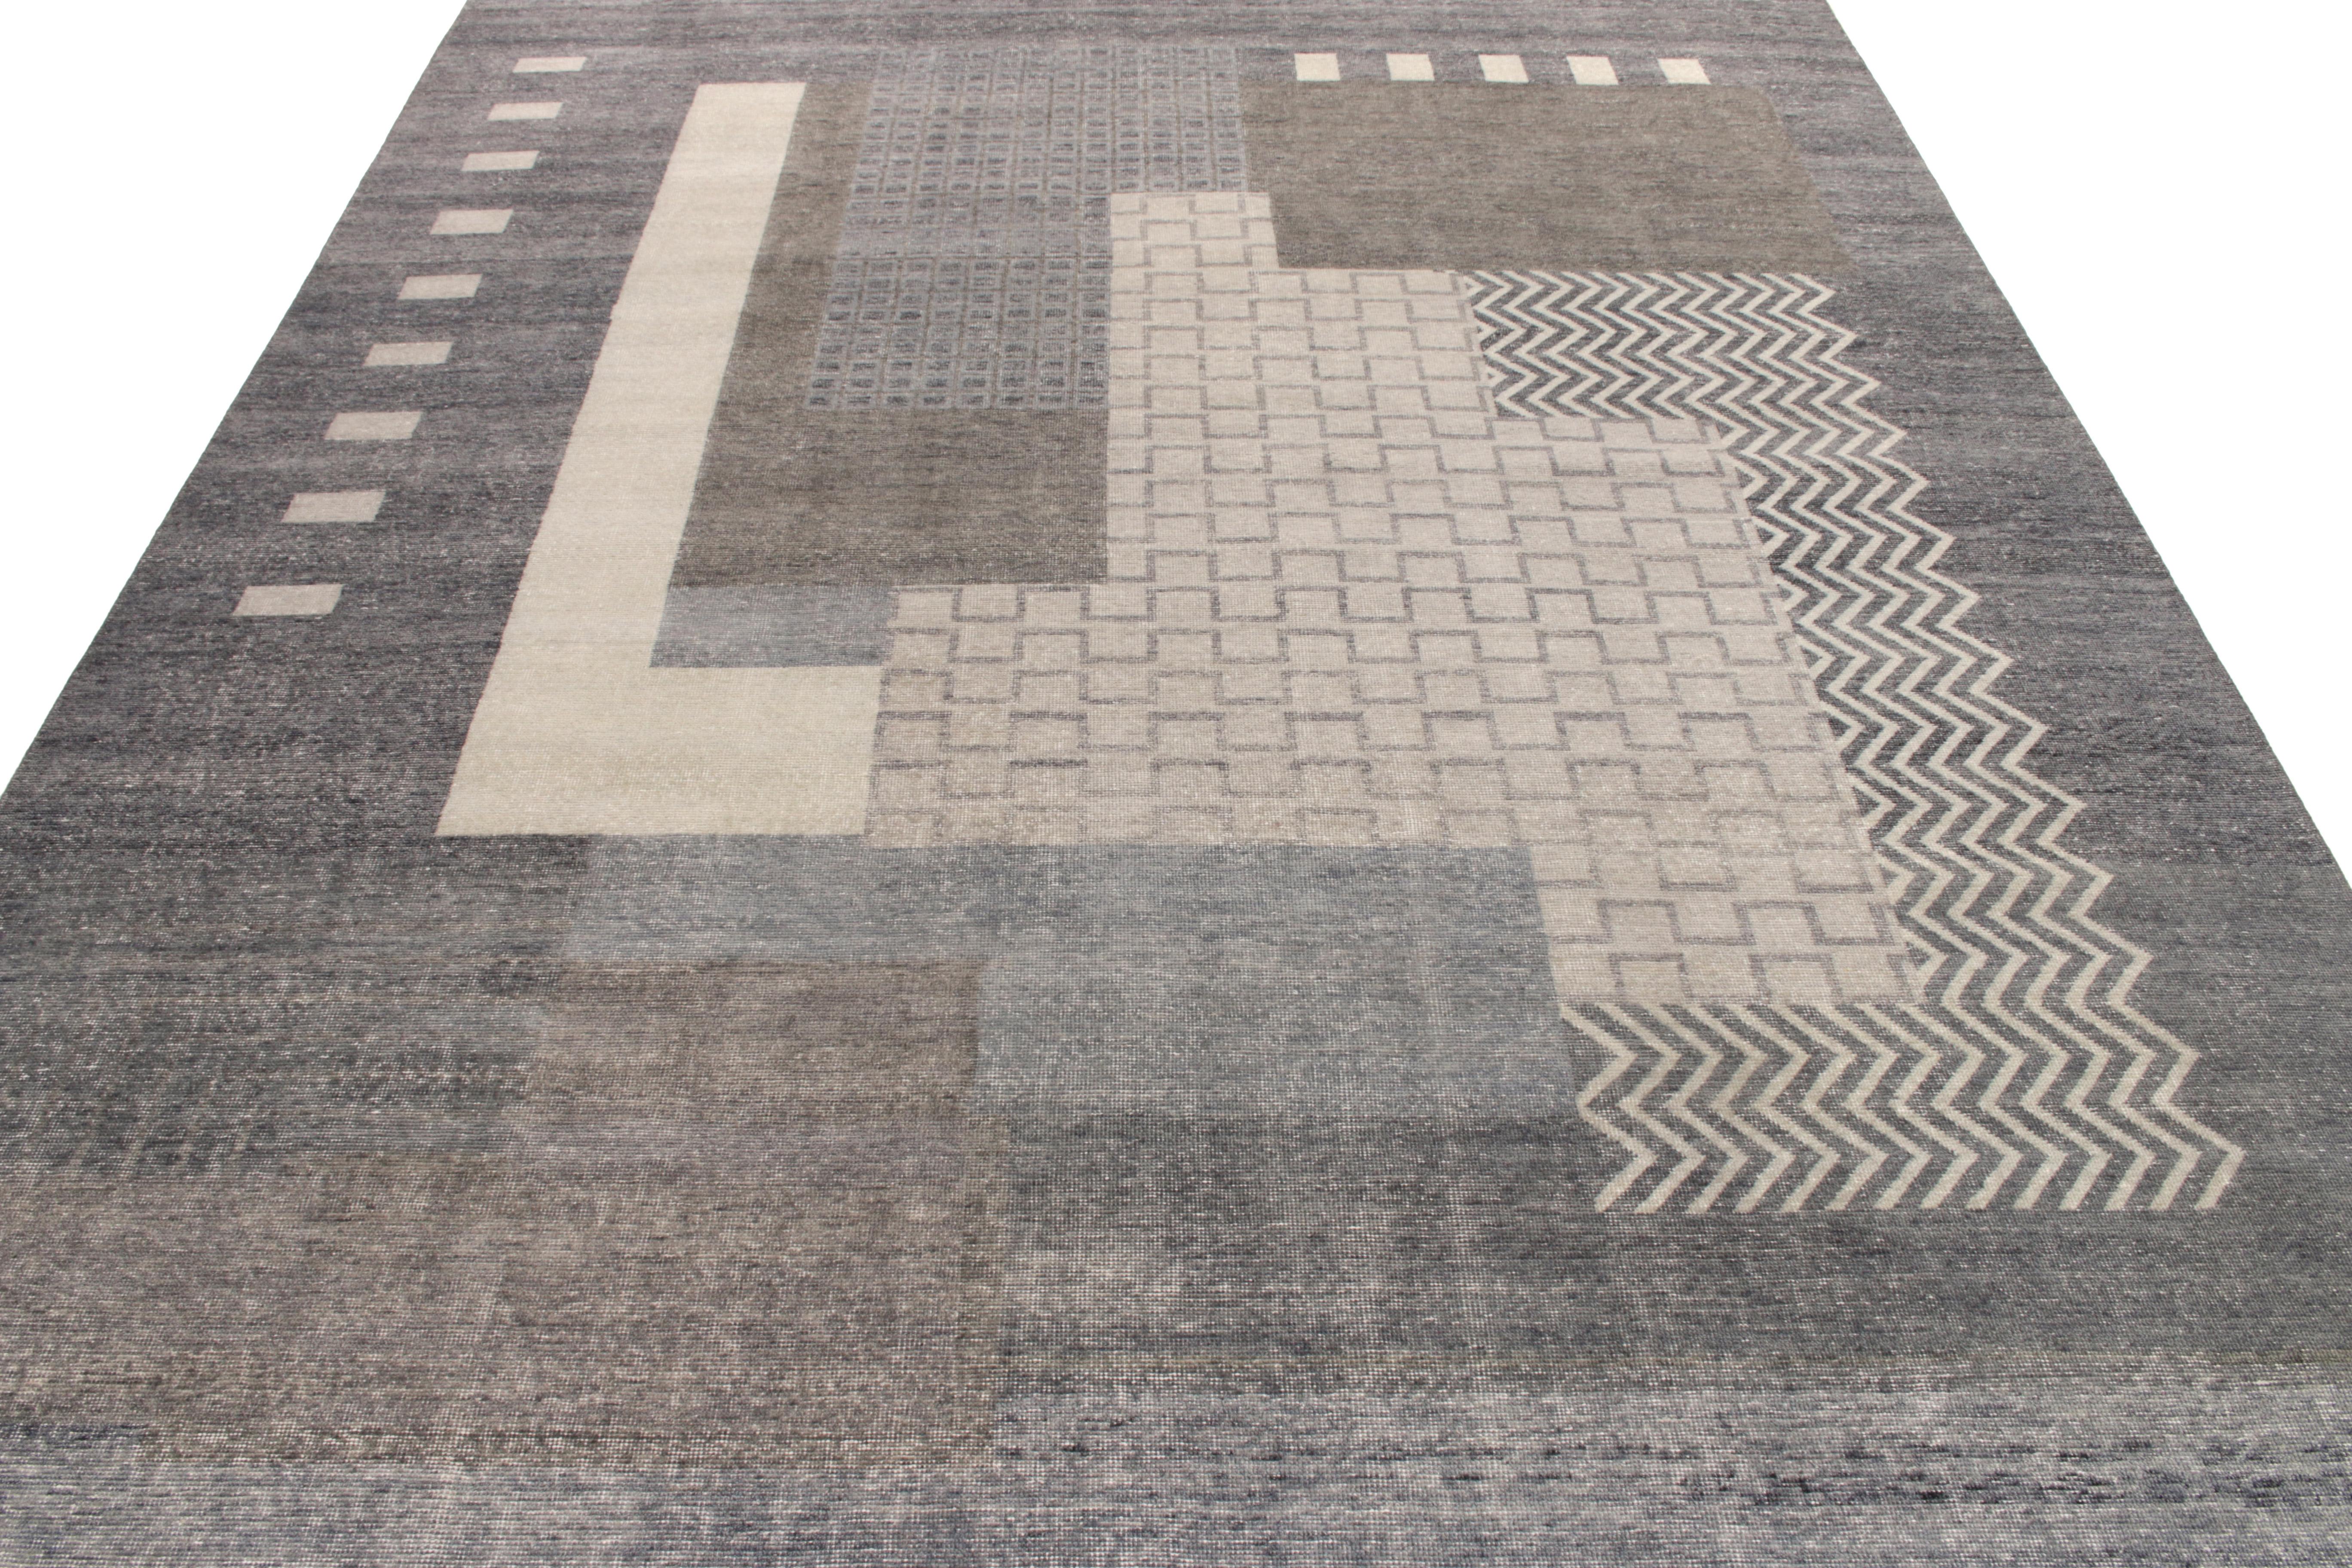 From Rug & Kilim’s distressed-style Homage Collection, a 10x14 ode to venerated French Art Deco rug styles in cool, industrial colors. Hues of silver and gray play with a mild blue and taupe accent in the geometry, sitting with a sophisticated,